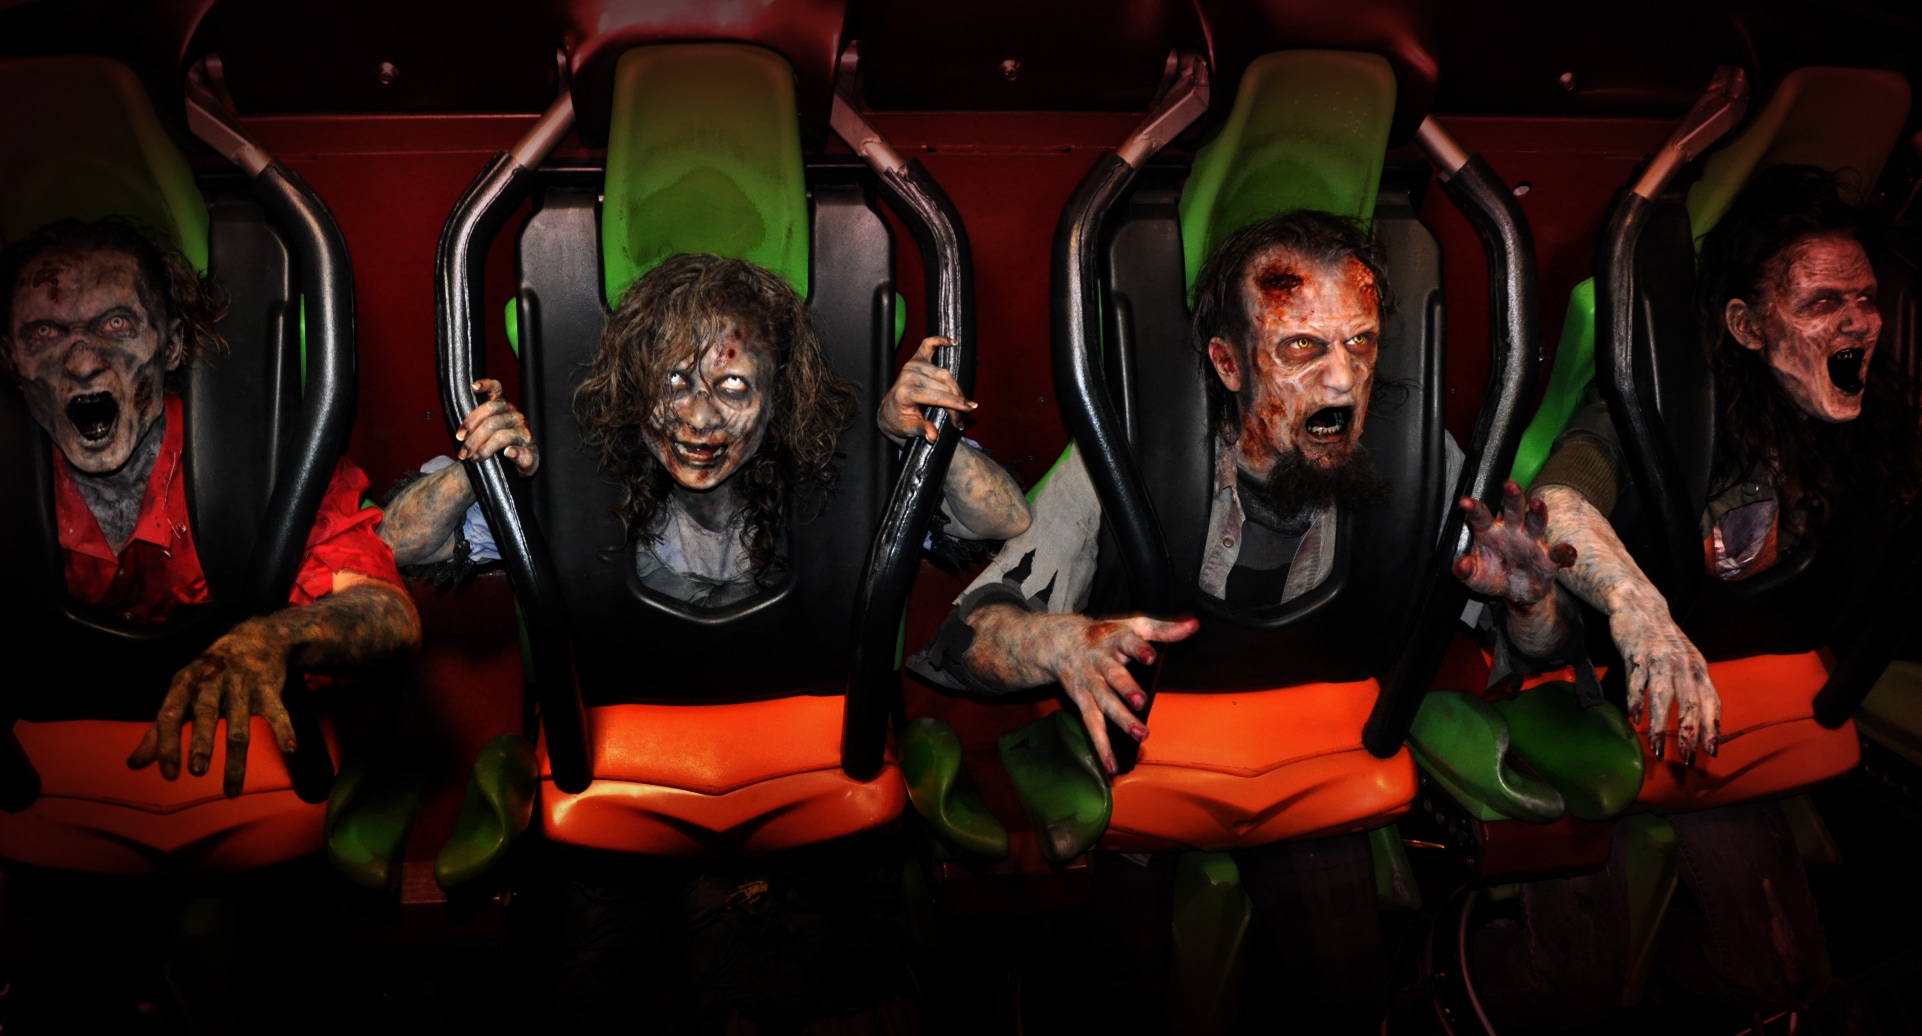 Magic Mountain Scary Night Wallpapers